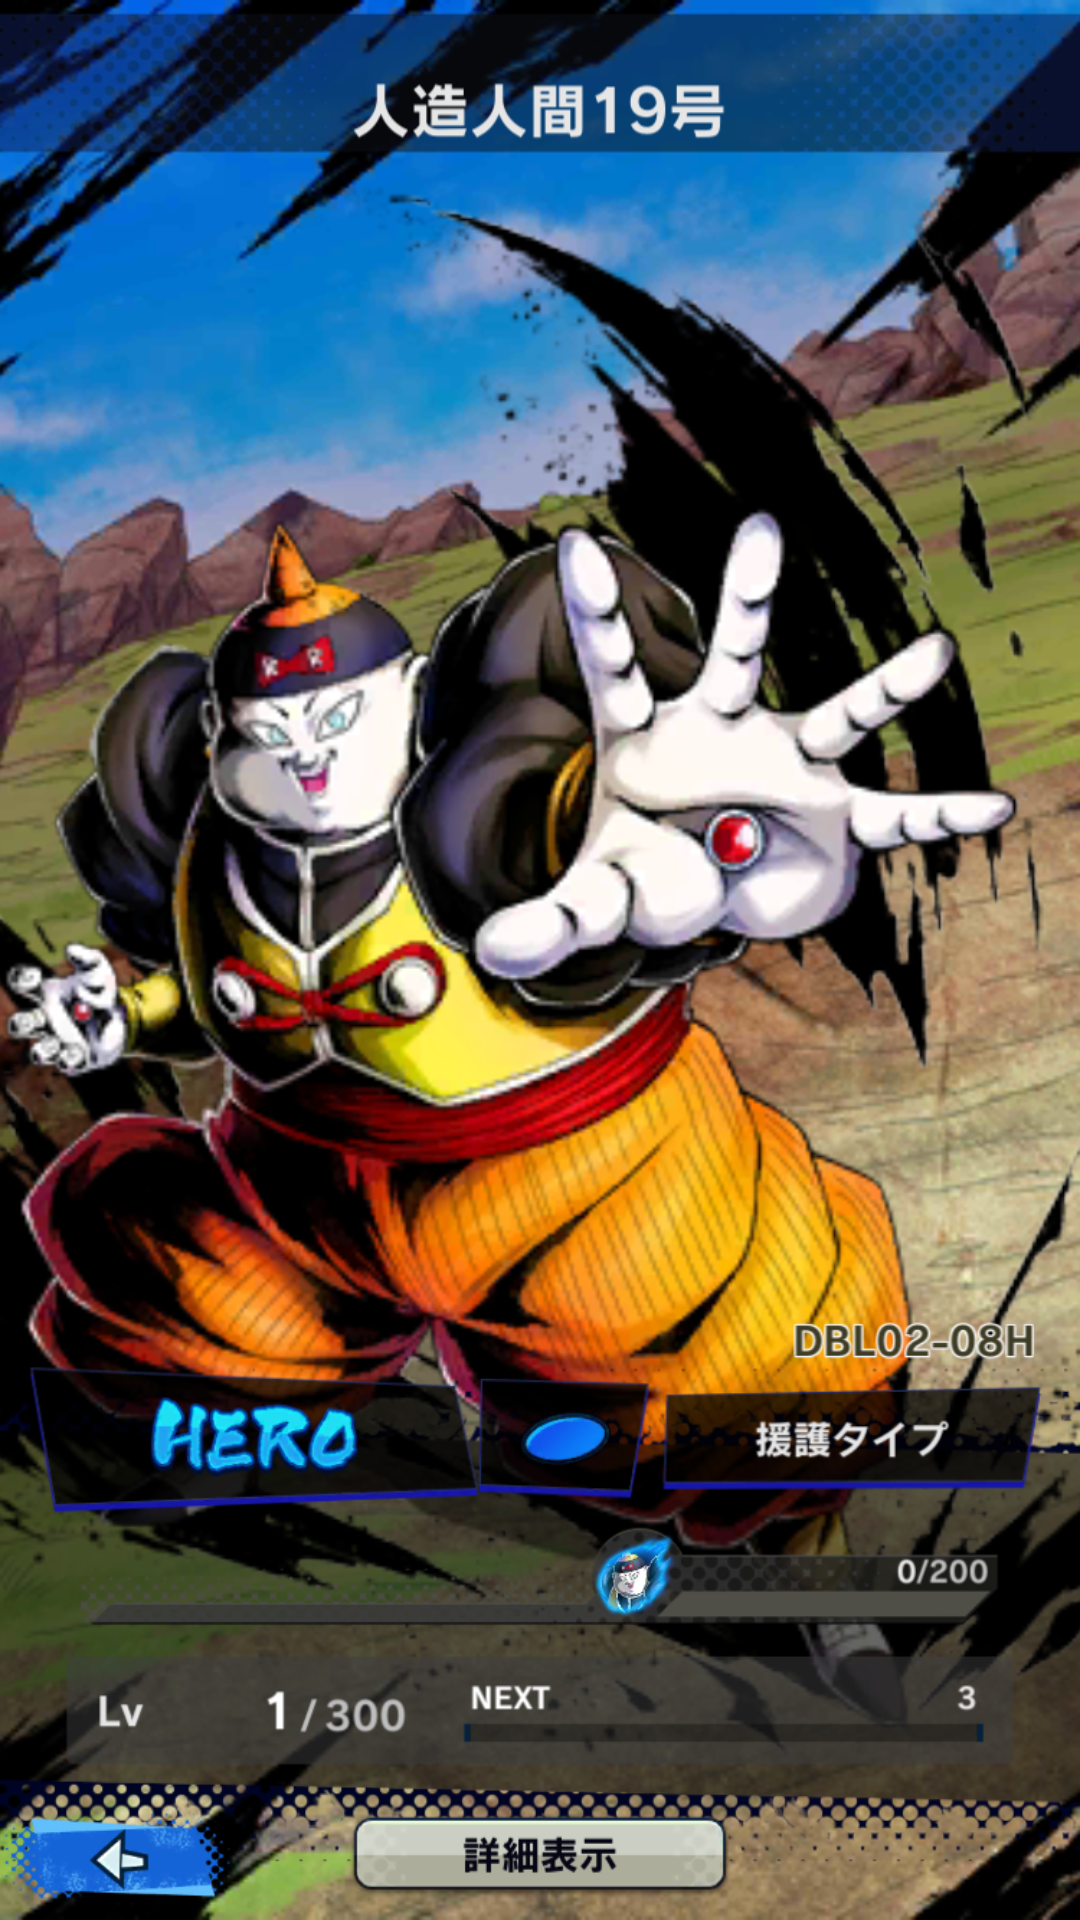 He Blu Android 19 Dbl02 08h Evaluation Dragon Ball Legends Blue